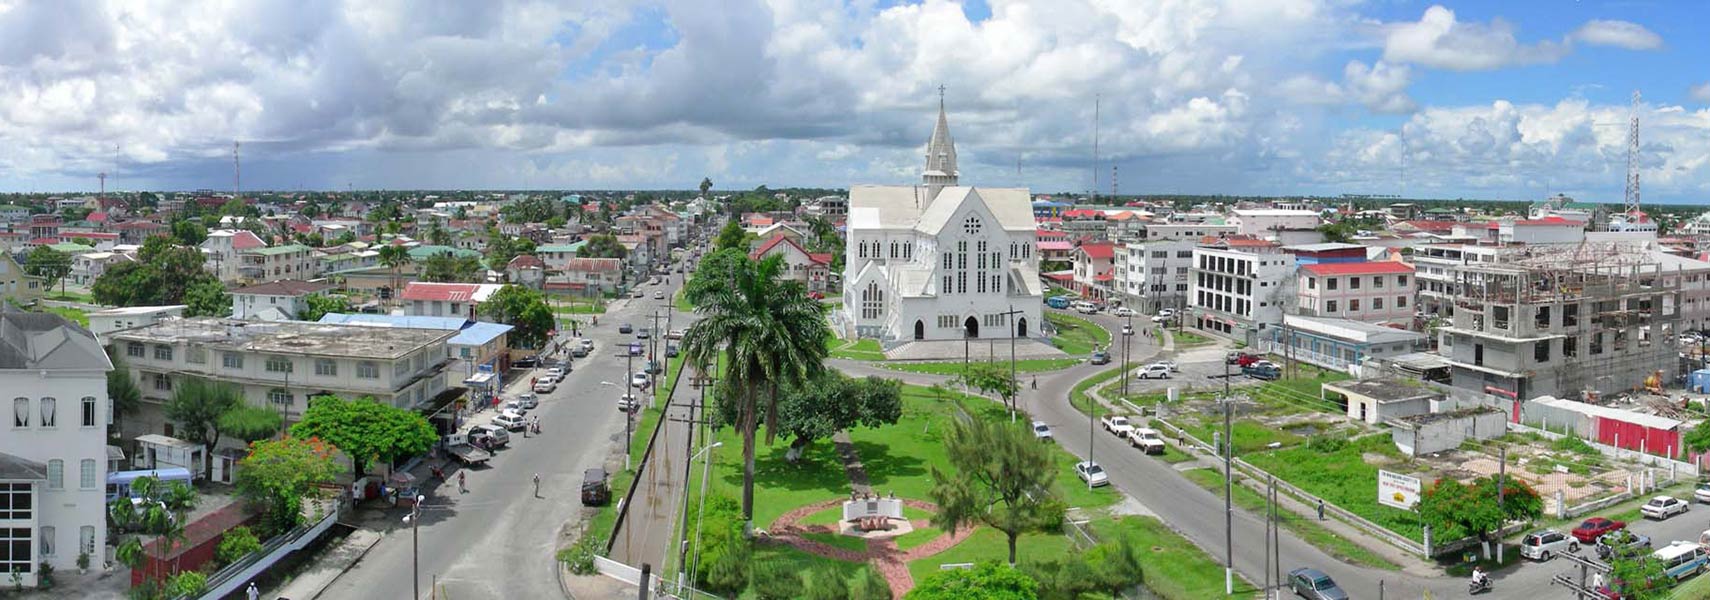 Panorama of Georgetown, Guyana with St. George's Cathedral